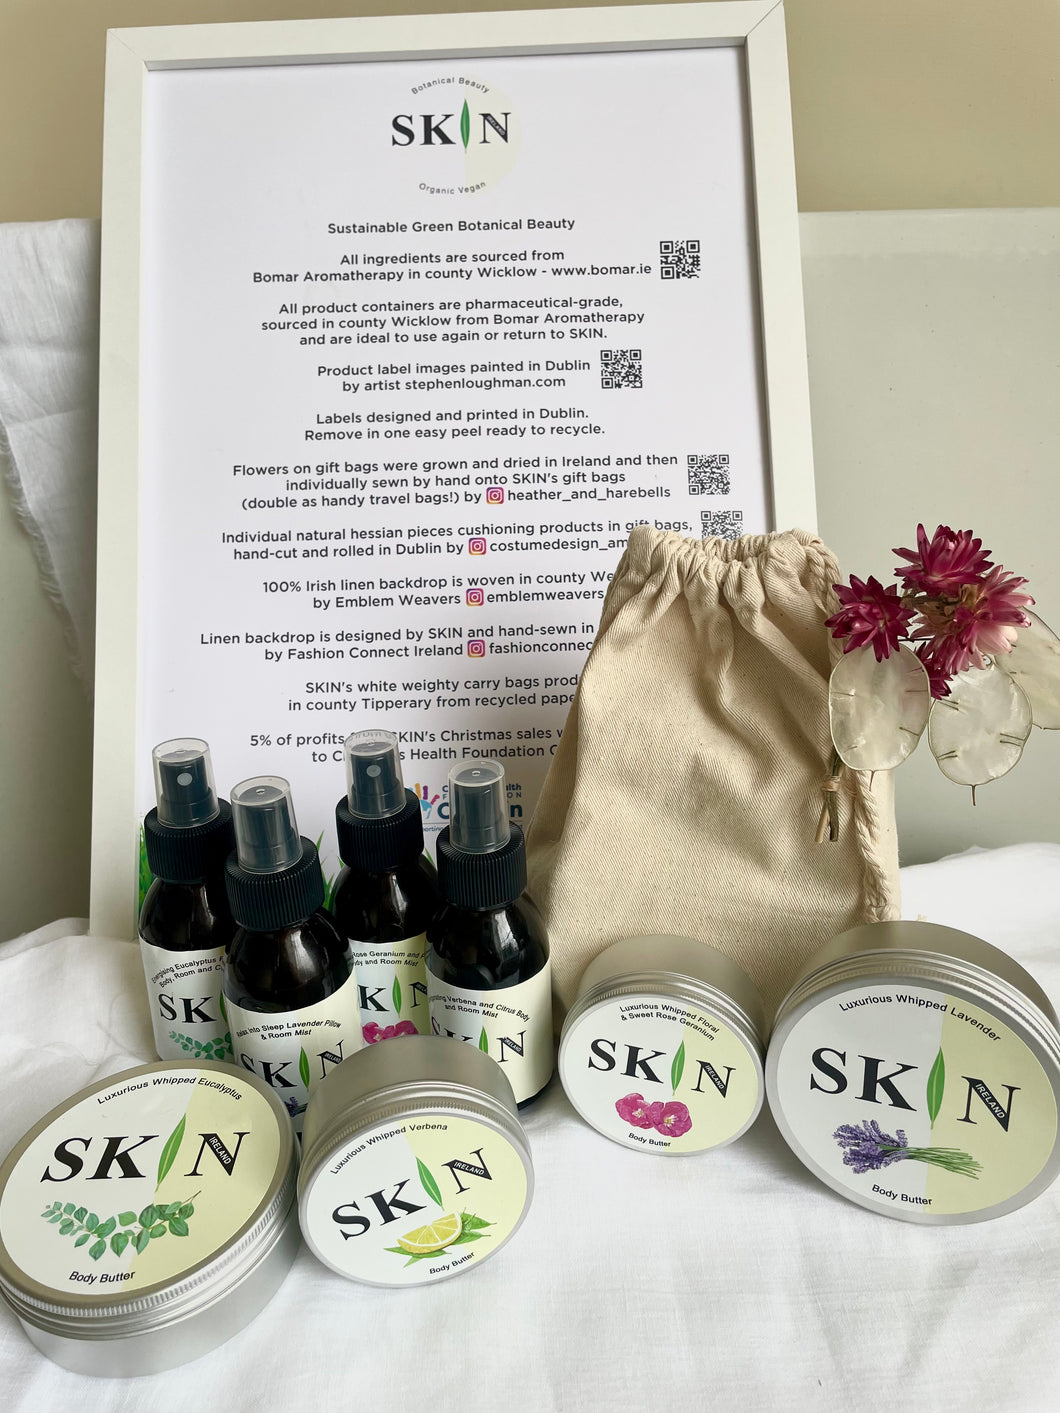 Sustainable Gift Bag of Large (200ml) Luxurious Lavender Body Butter and Relax into Sleep Lavender Pillow and Room Mist.  Gift bag features Irish grown and naturally dried flower, hand-sewn onto linen bag - handy for travel !